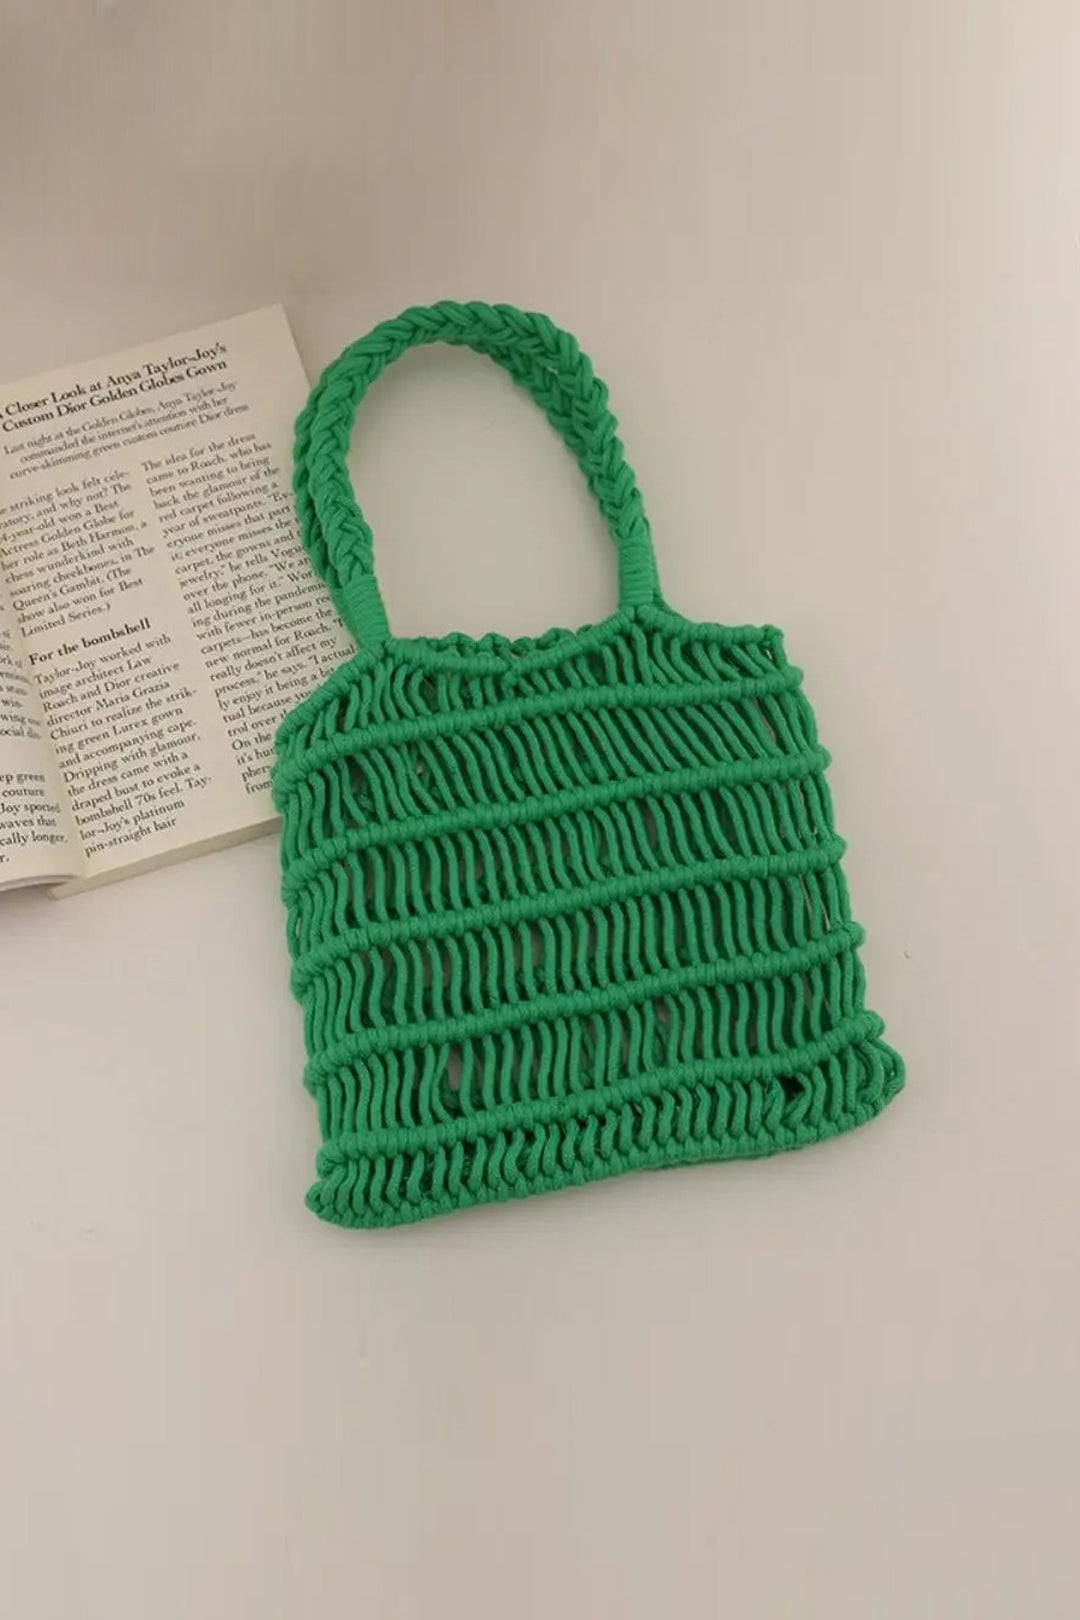 Hollow Woven Tote Bag